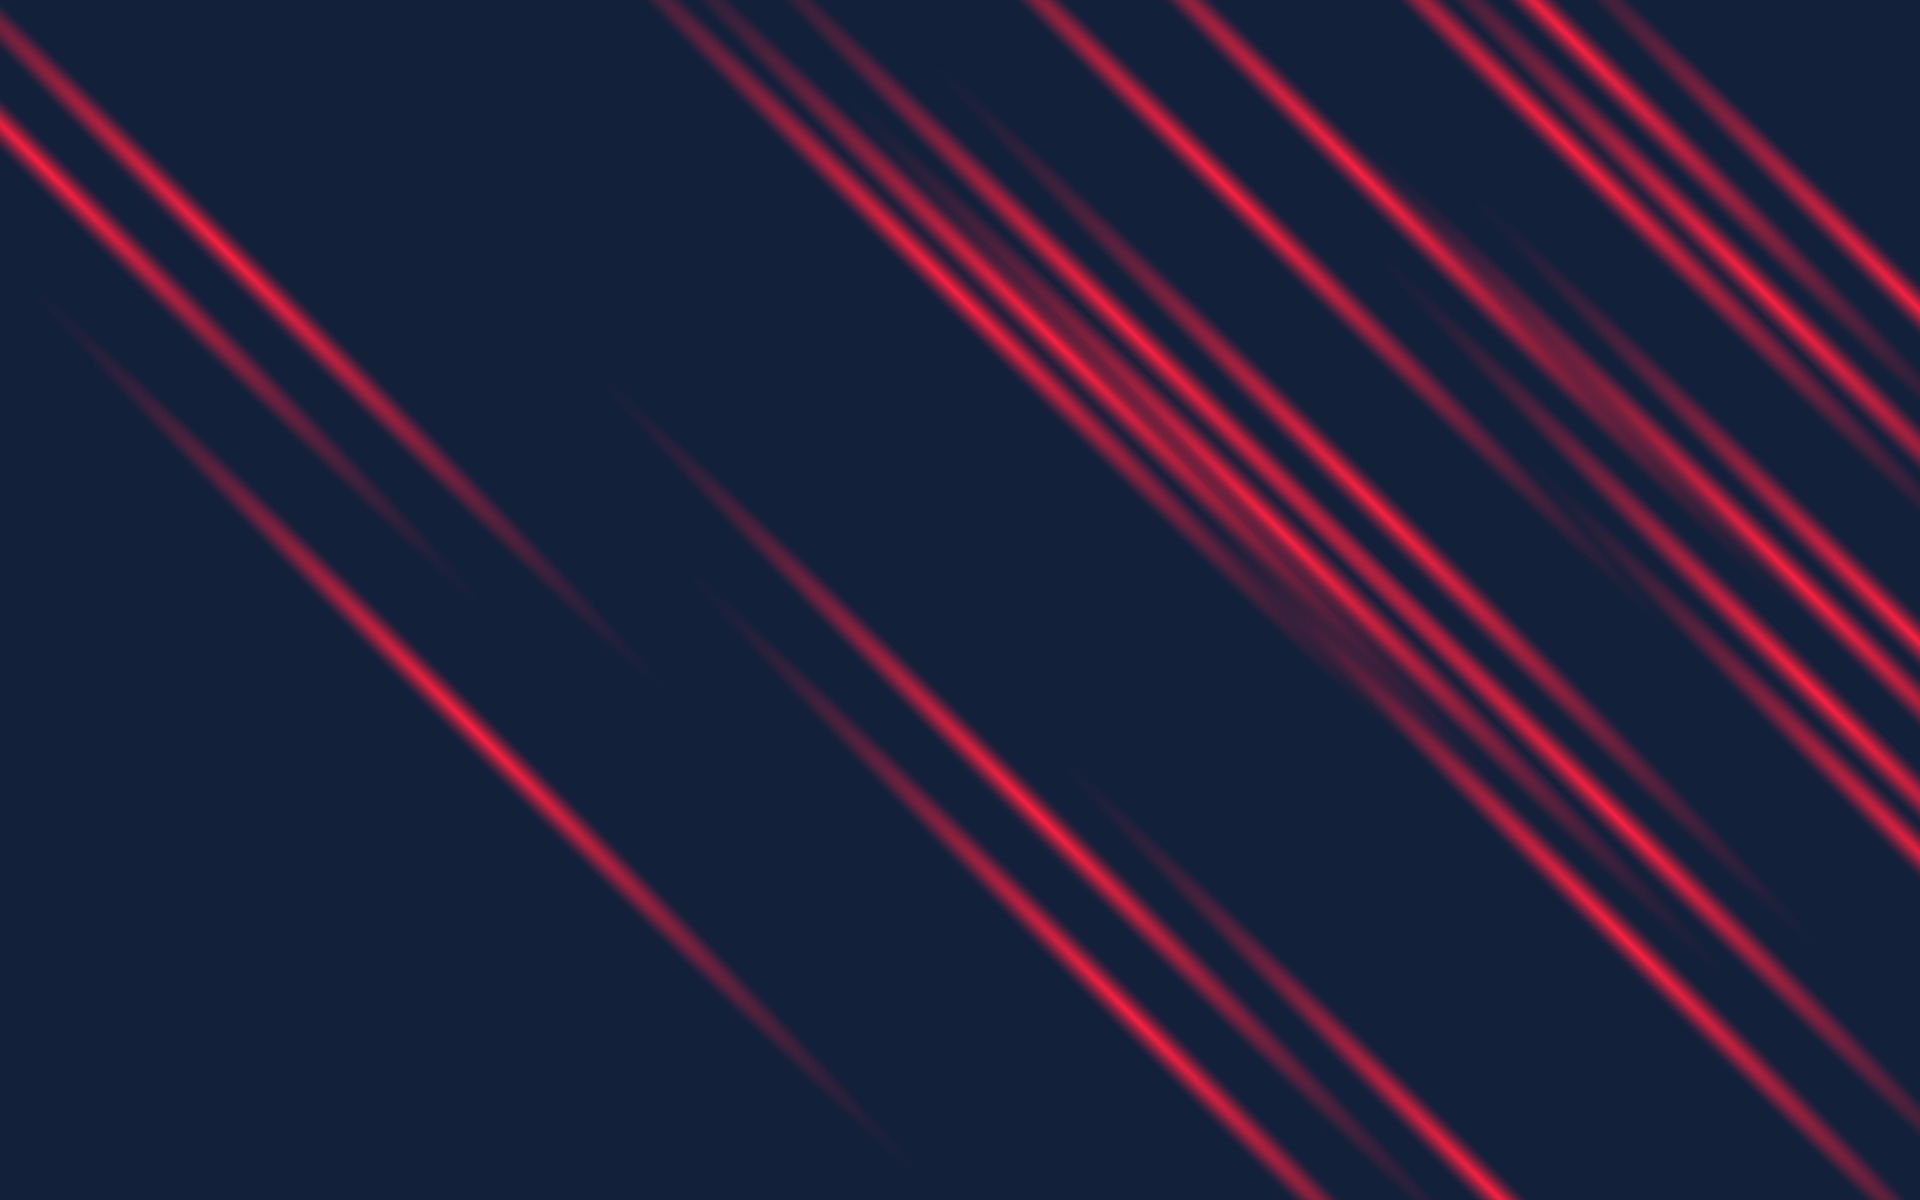 abstract navy blue with red light background illustration. eps10